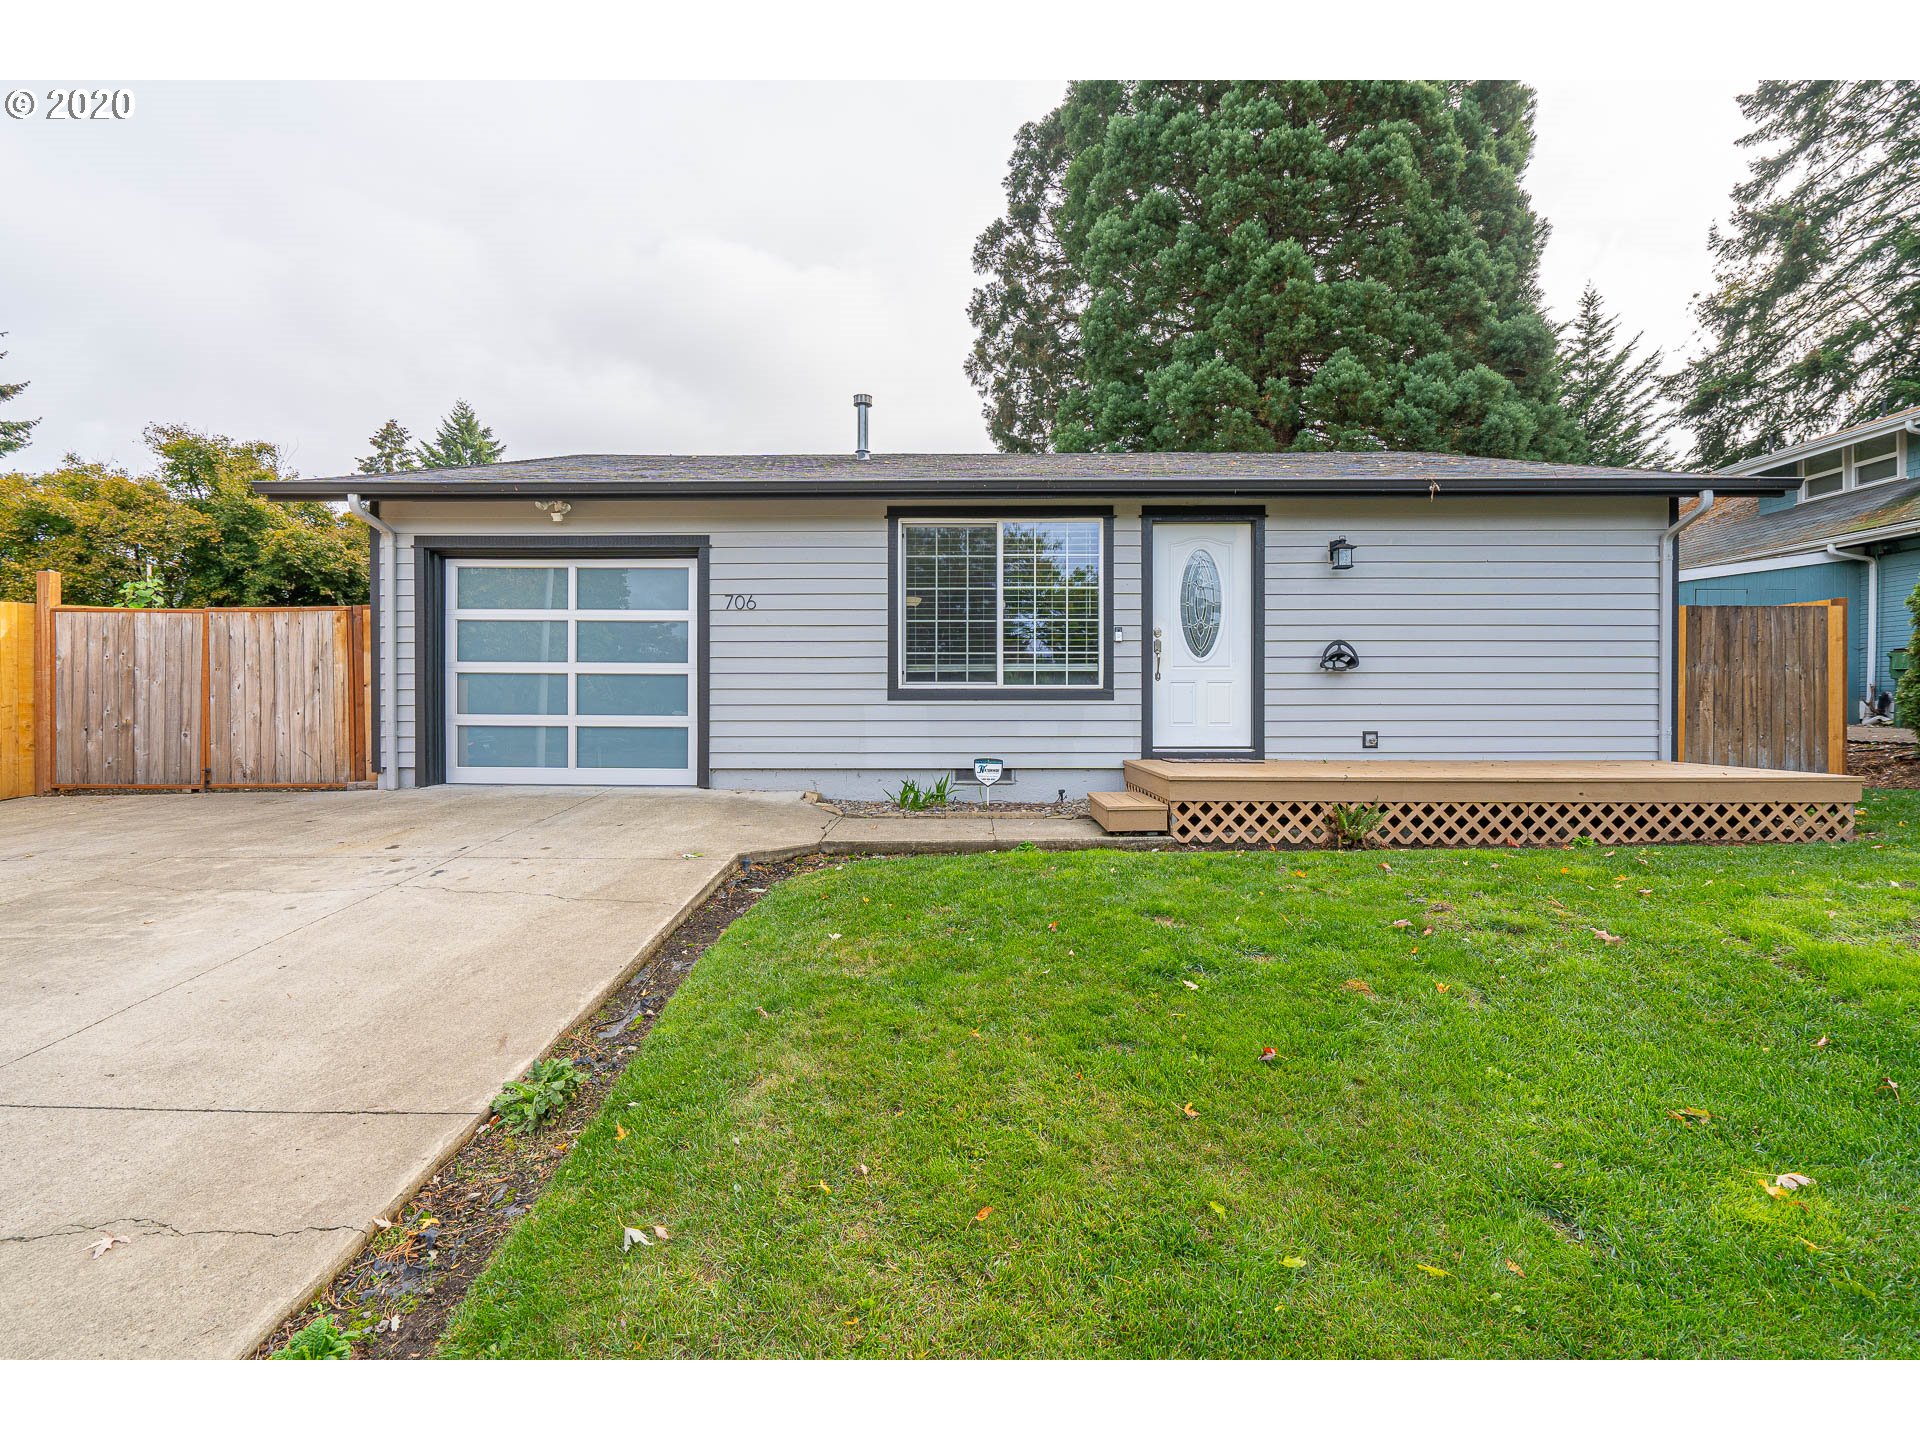 706 N SITKA AVE (1 of 32)